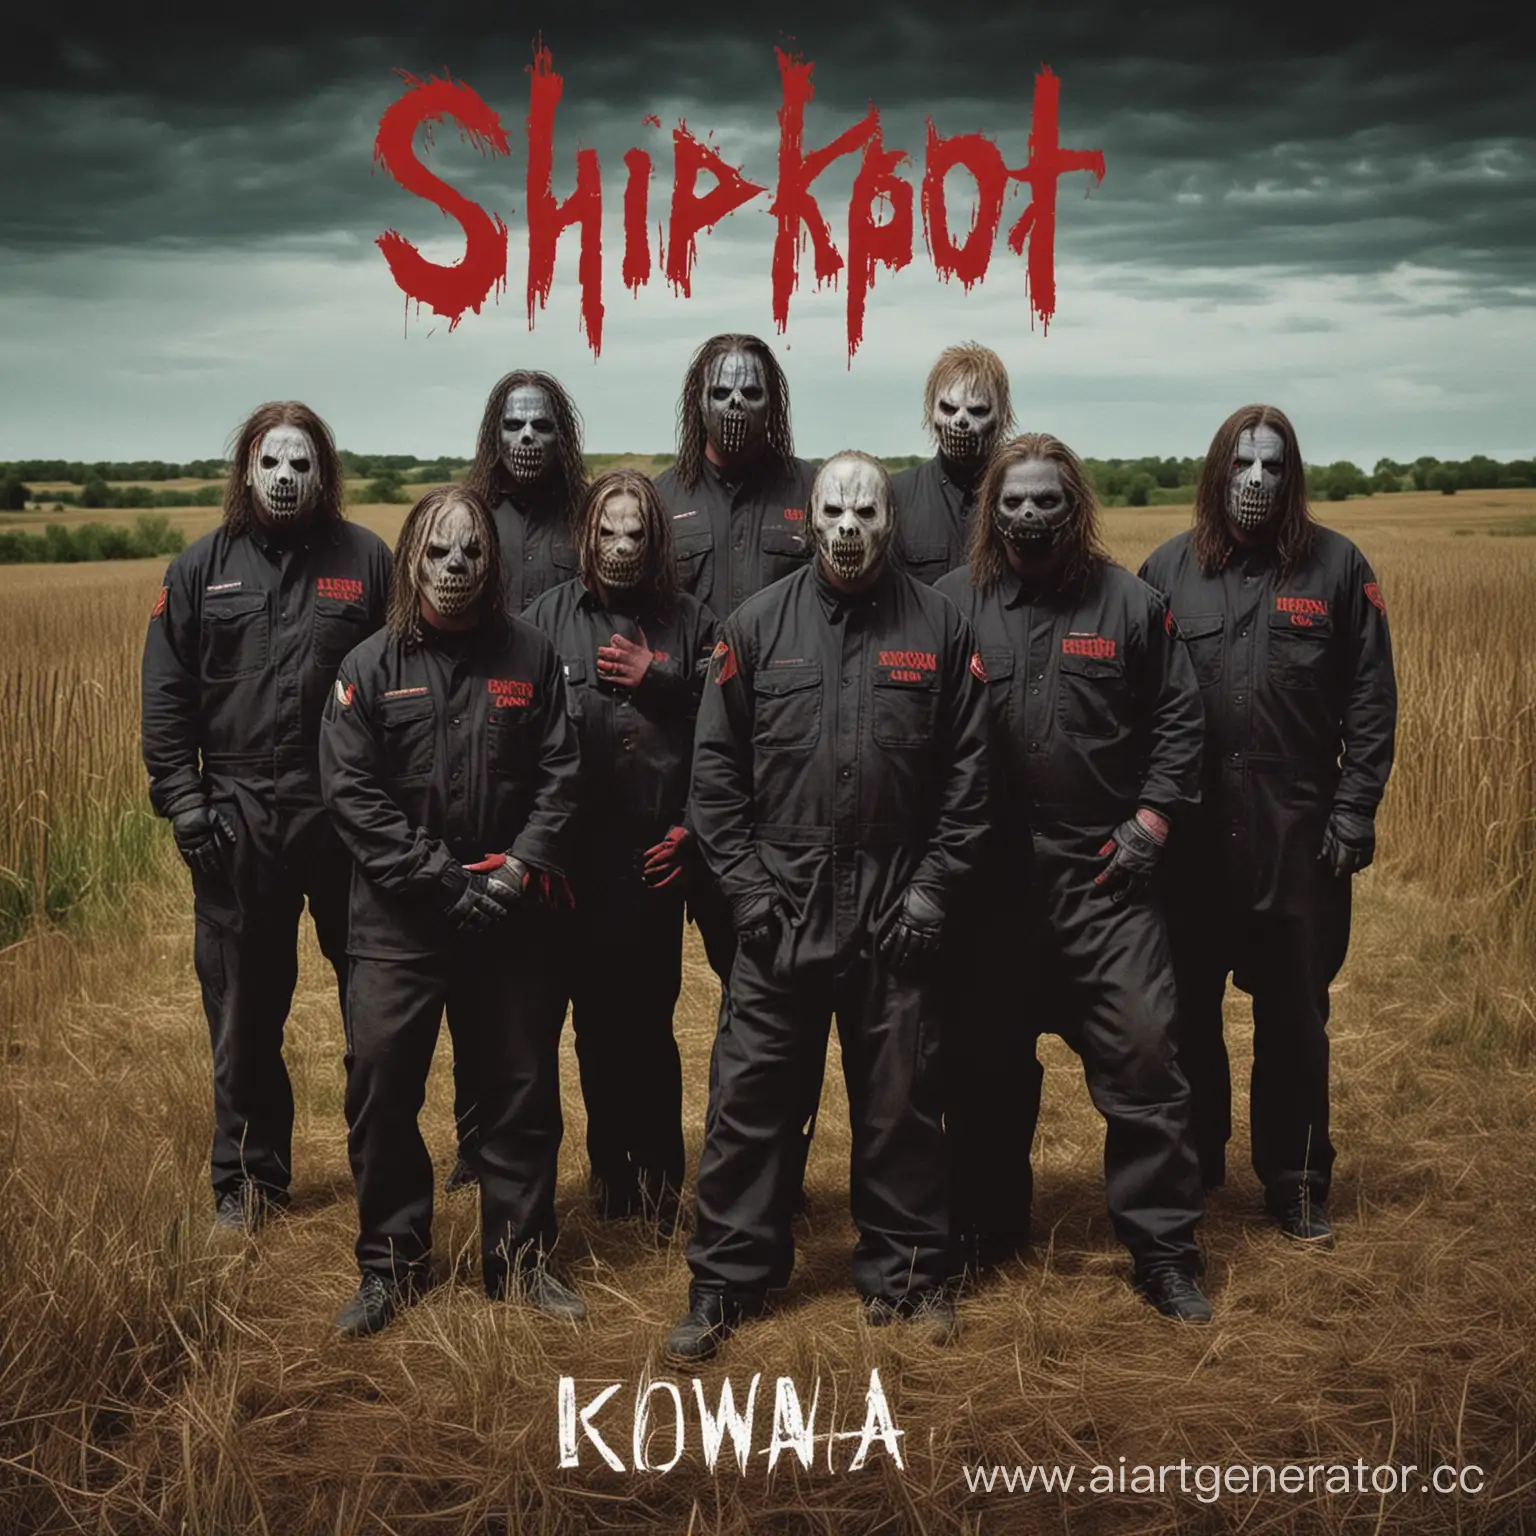 Masked-Band-Members-in-Industrial-Setting-for-Slipknot-Iowa-Album-Cover-Art